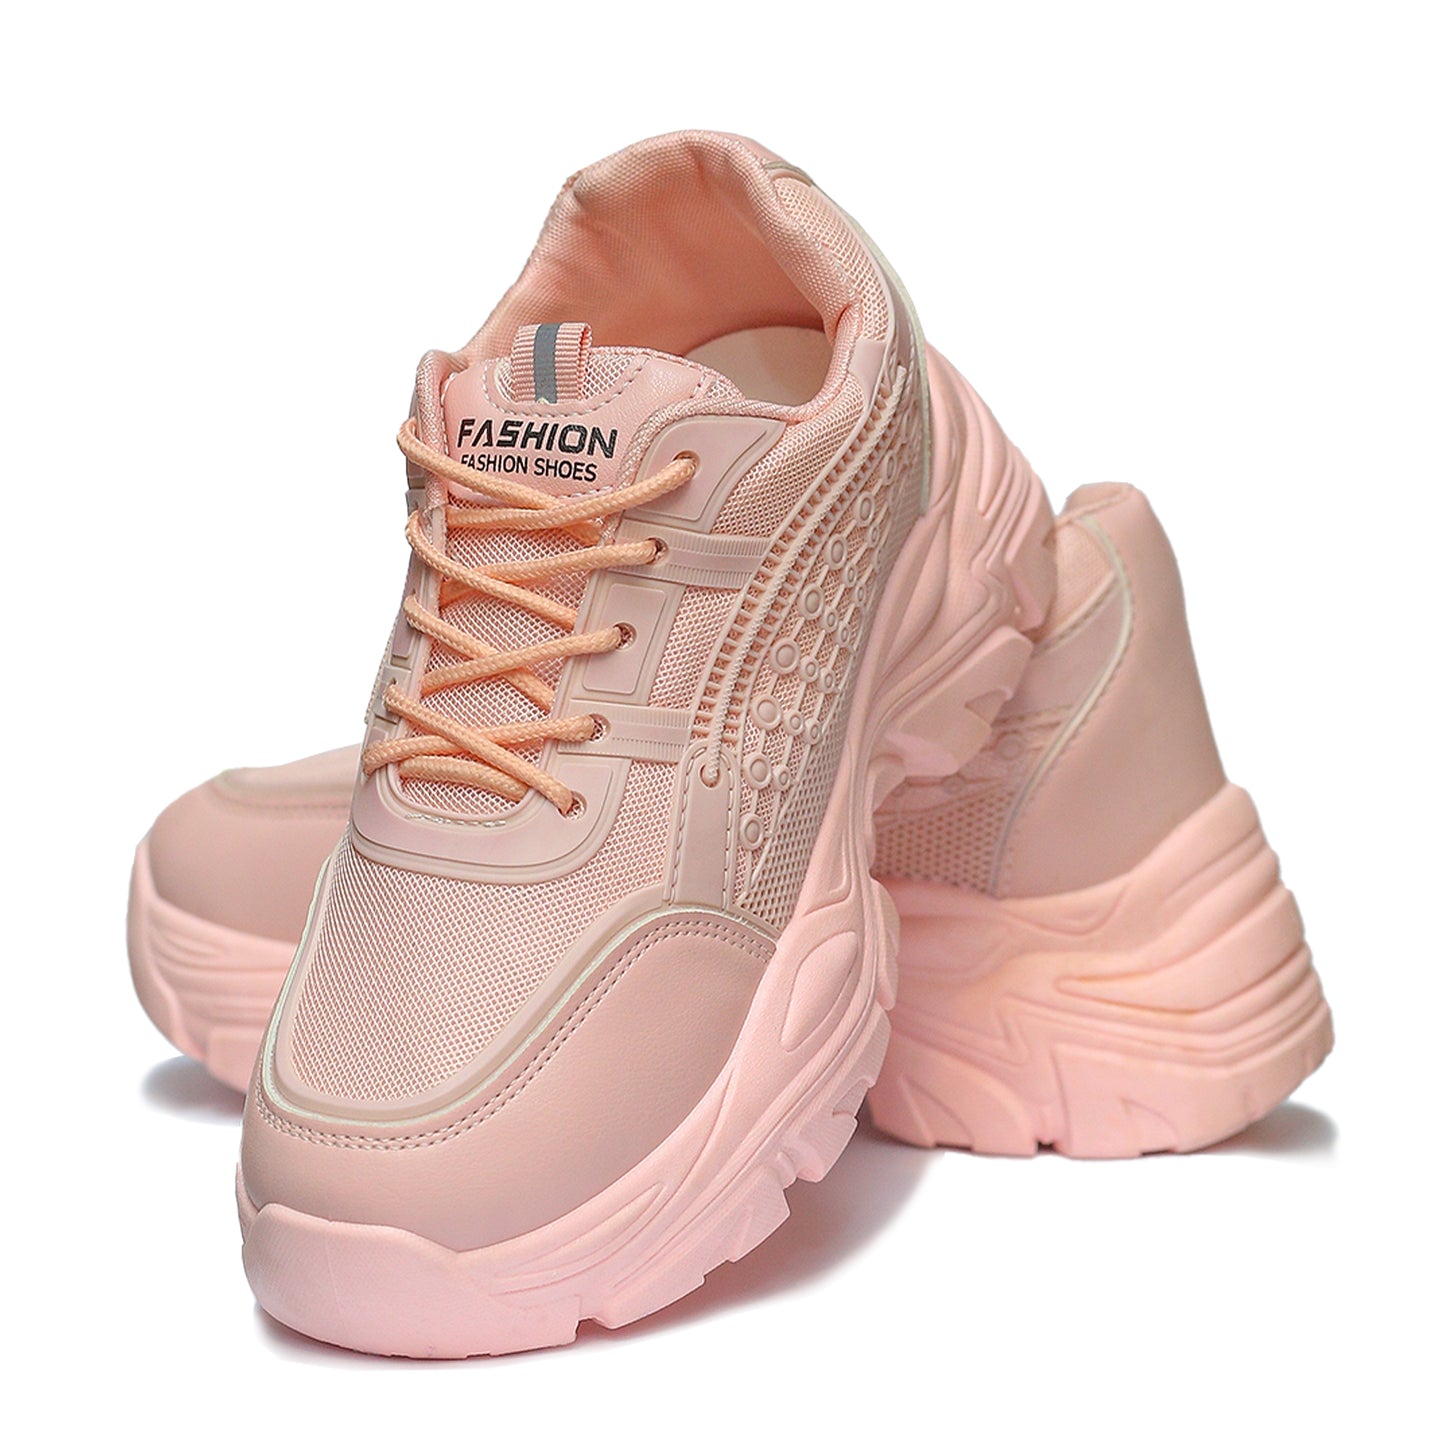 Premium Quality Sport Shoes For Girls